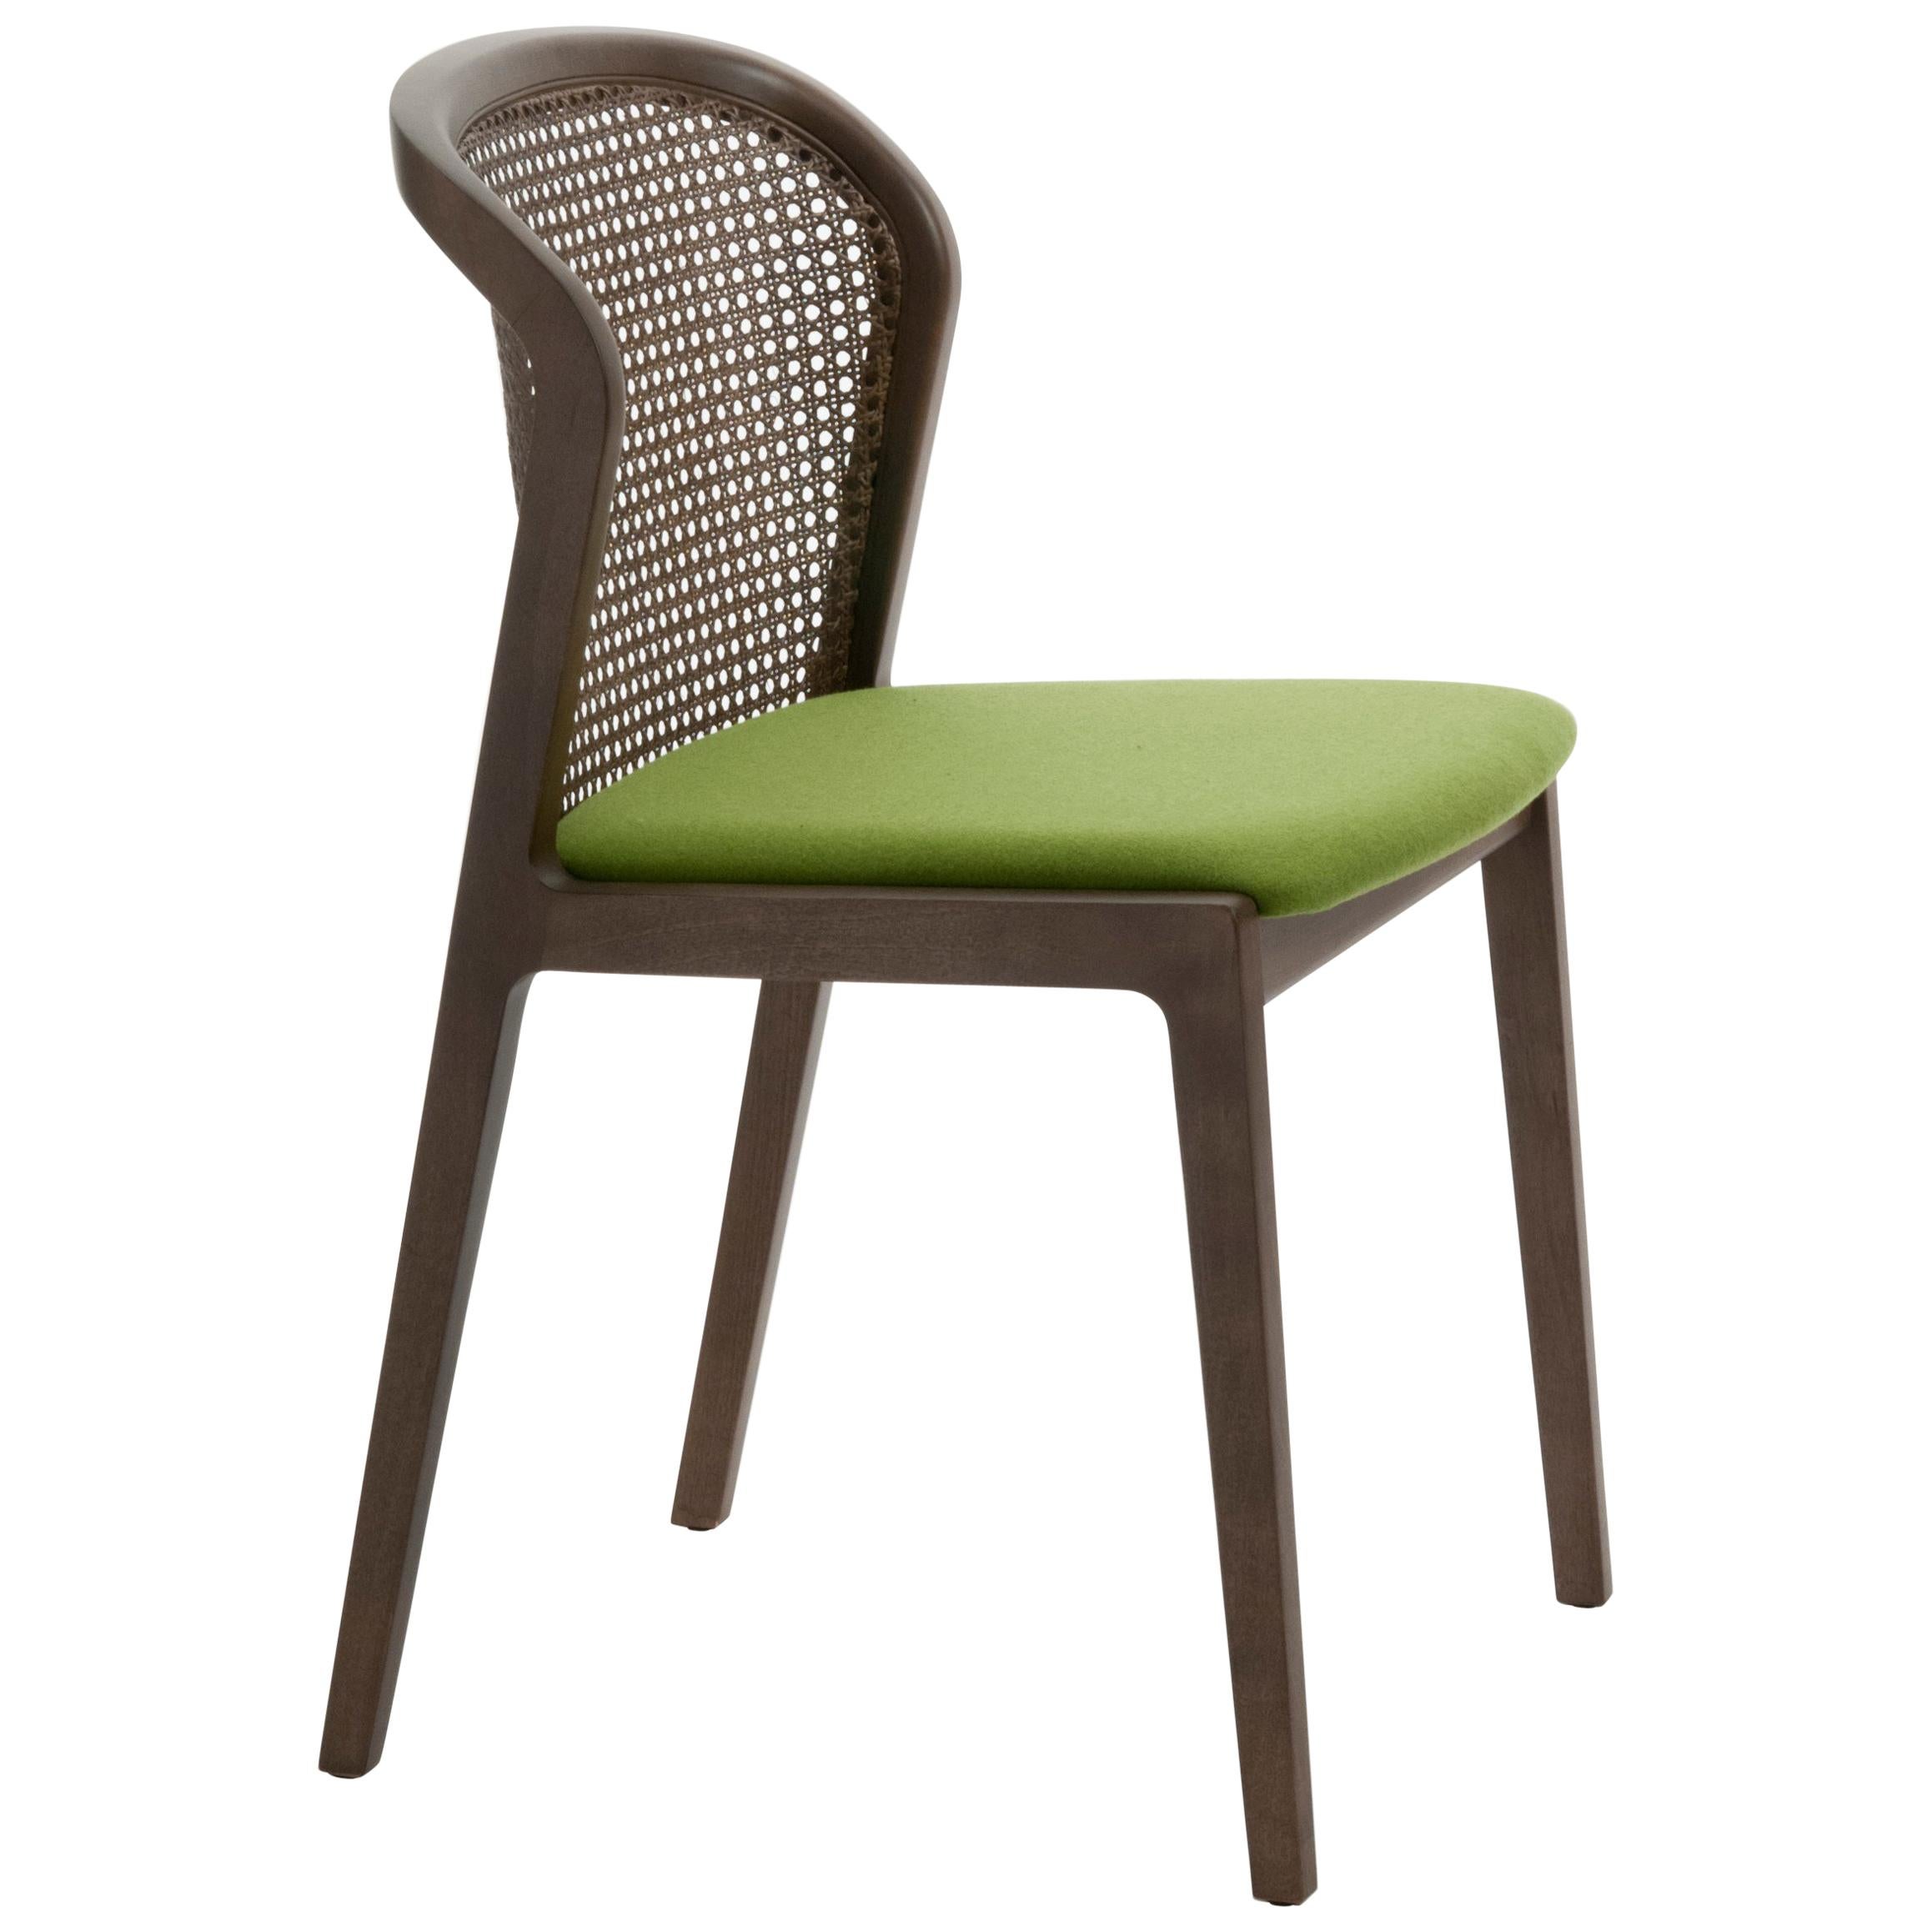 Vienna Chair, Contemporary Design Inspired by Straw Traditional Chairs